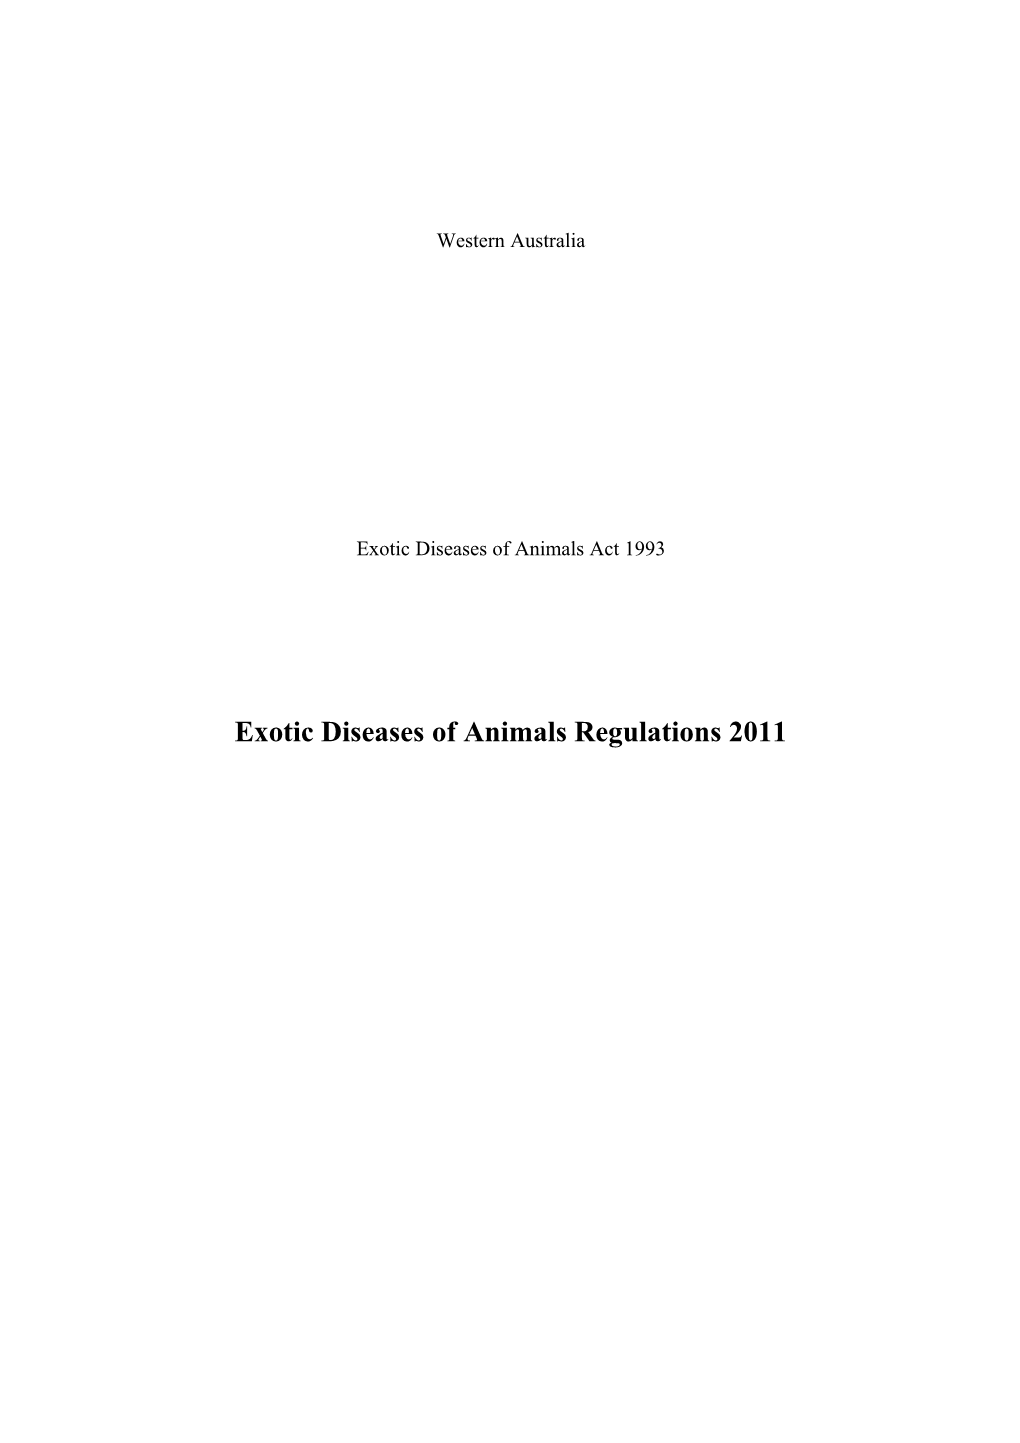 Exotic Diseases of Animals Regulations 2011 - 00-A0-00